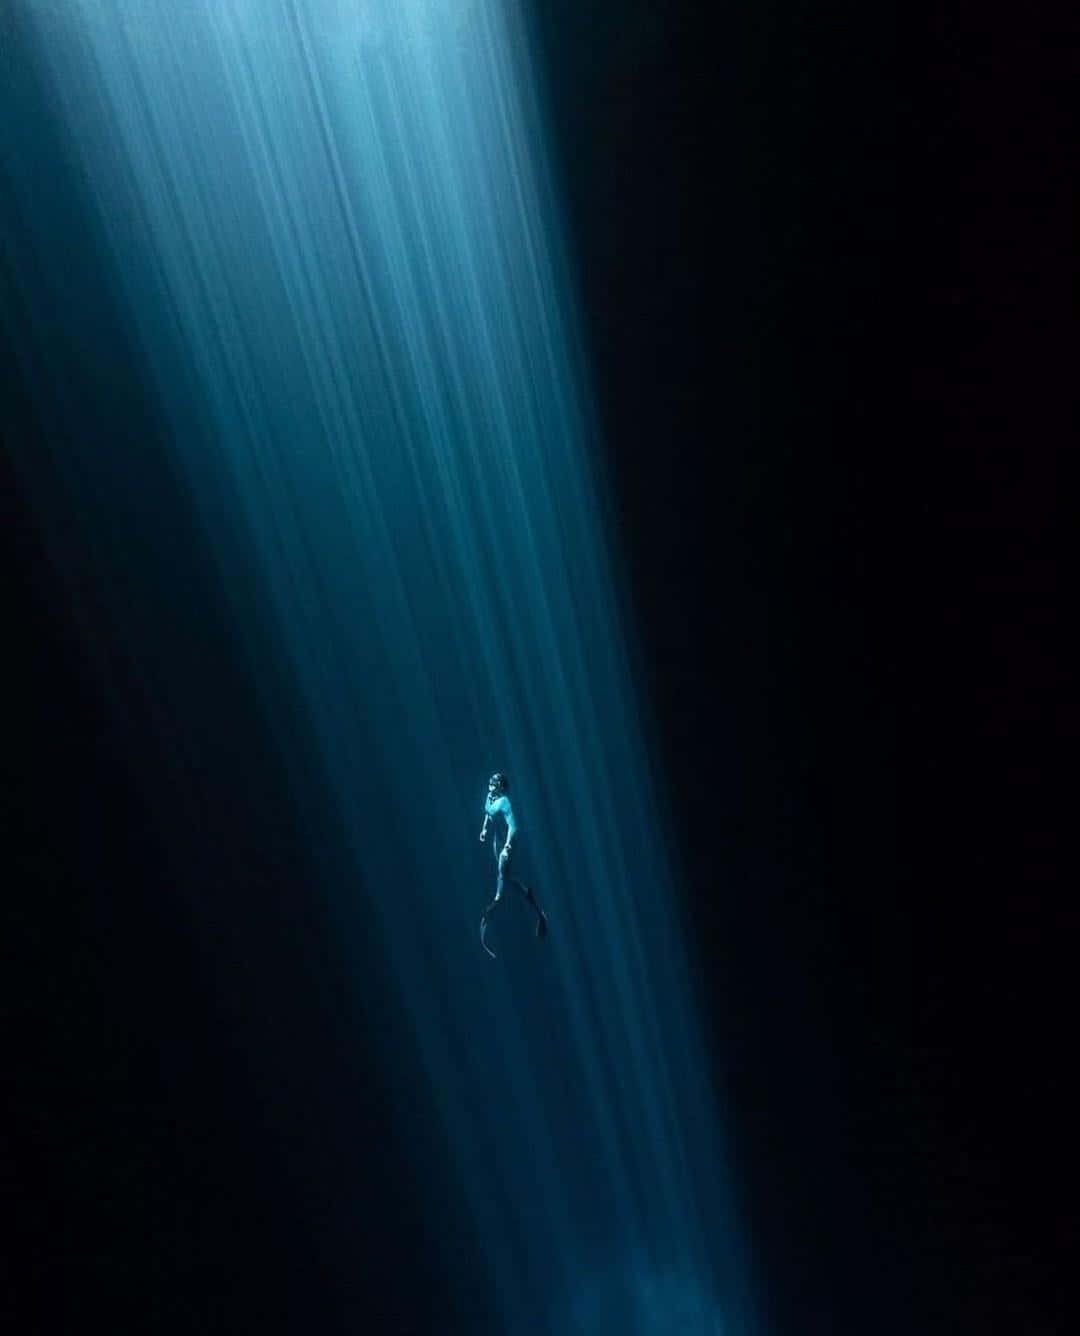 Something scary is lurking beneath this dark, mysterious underwater landscape.